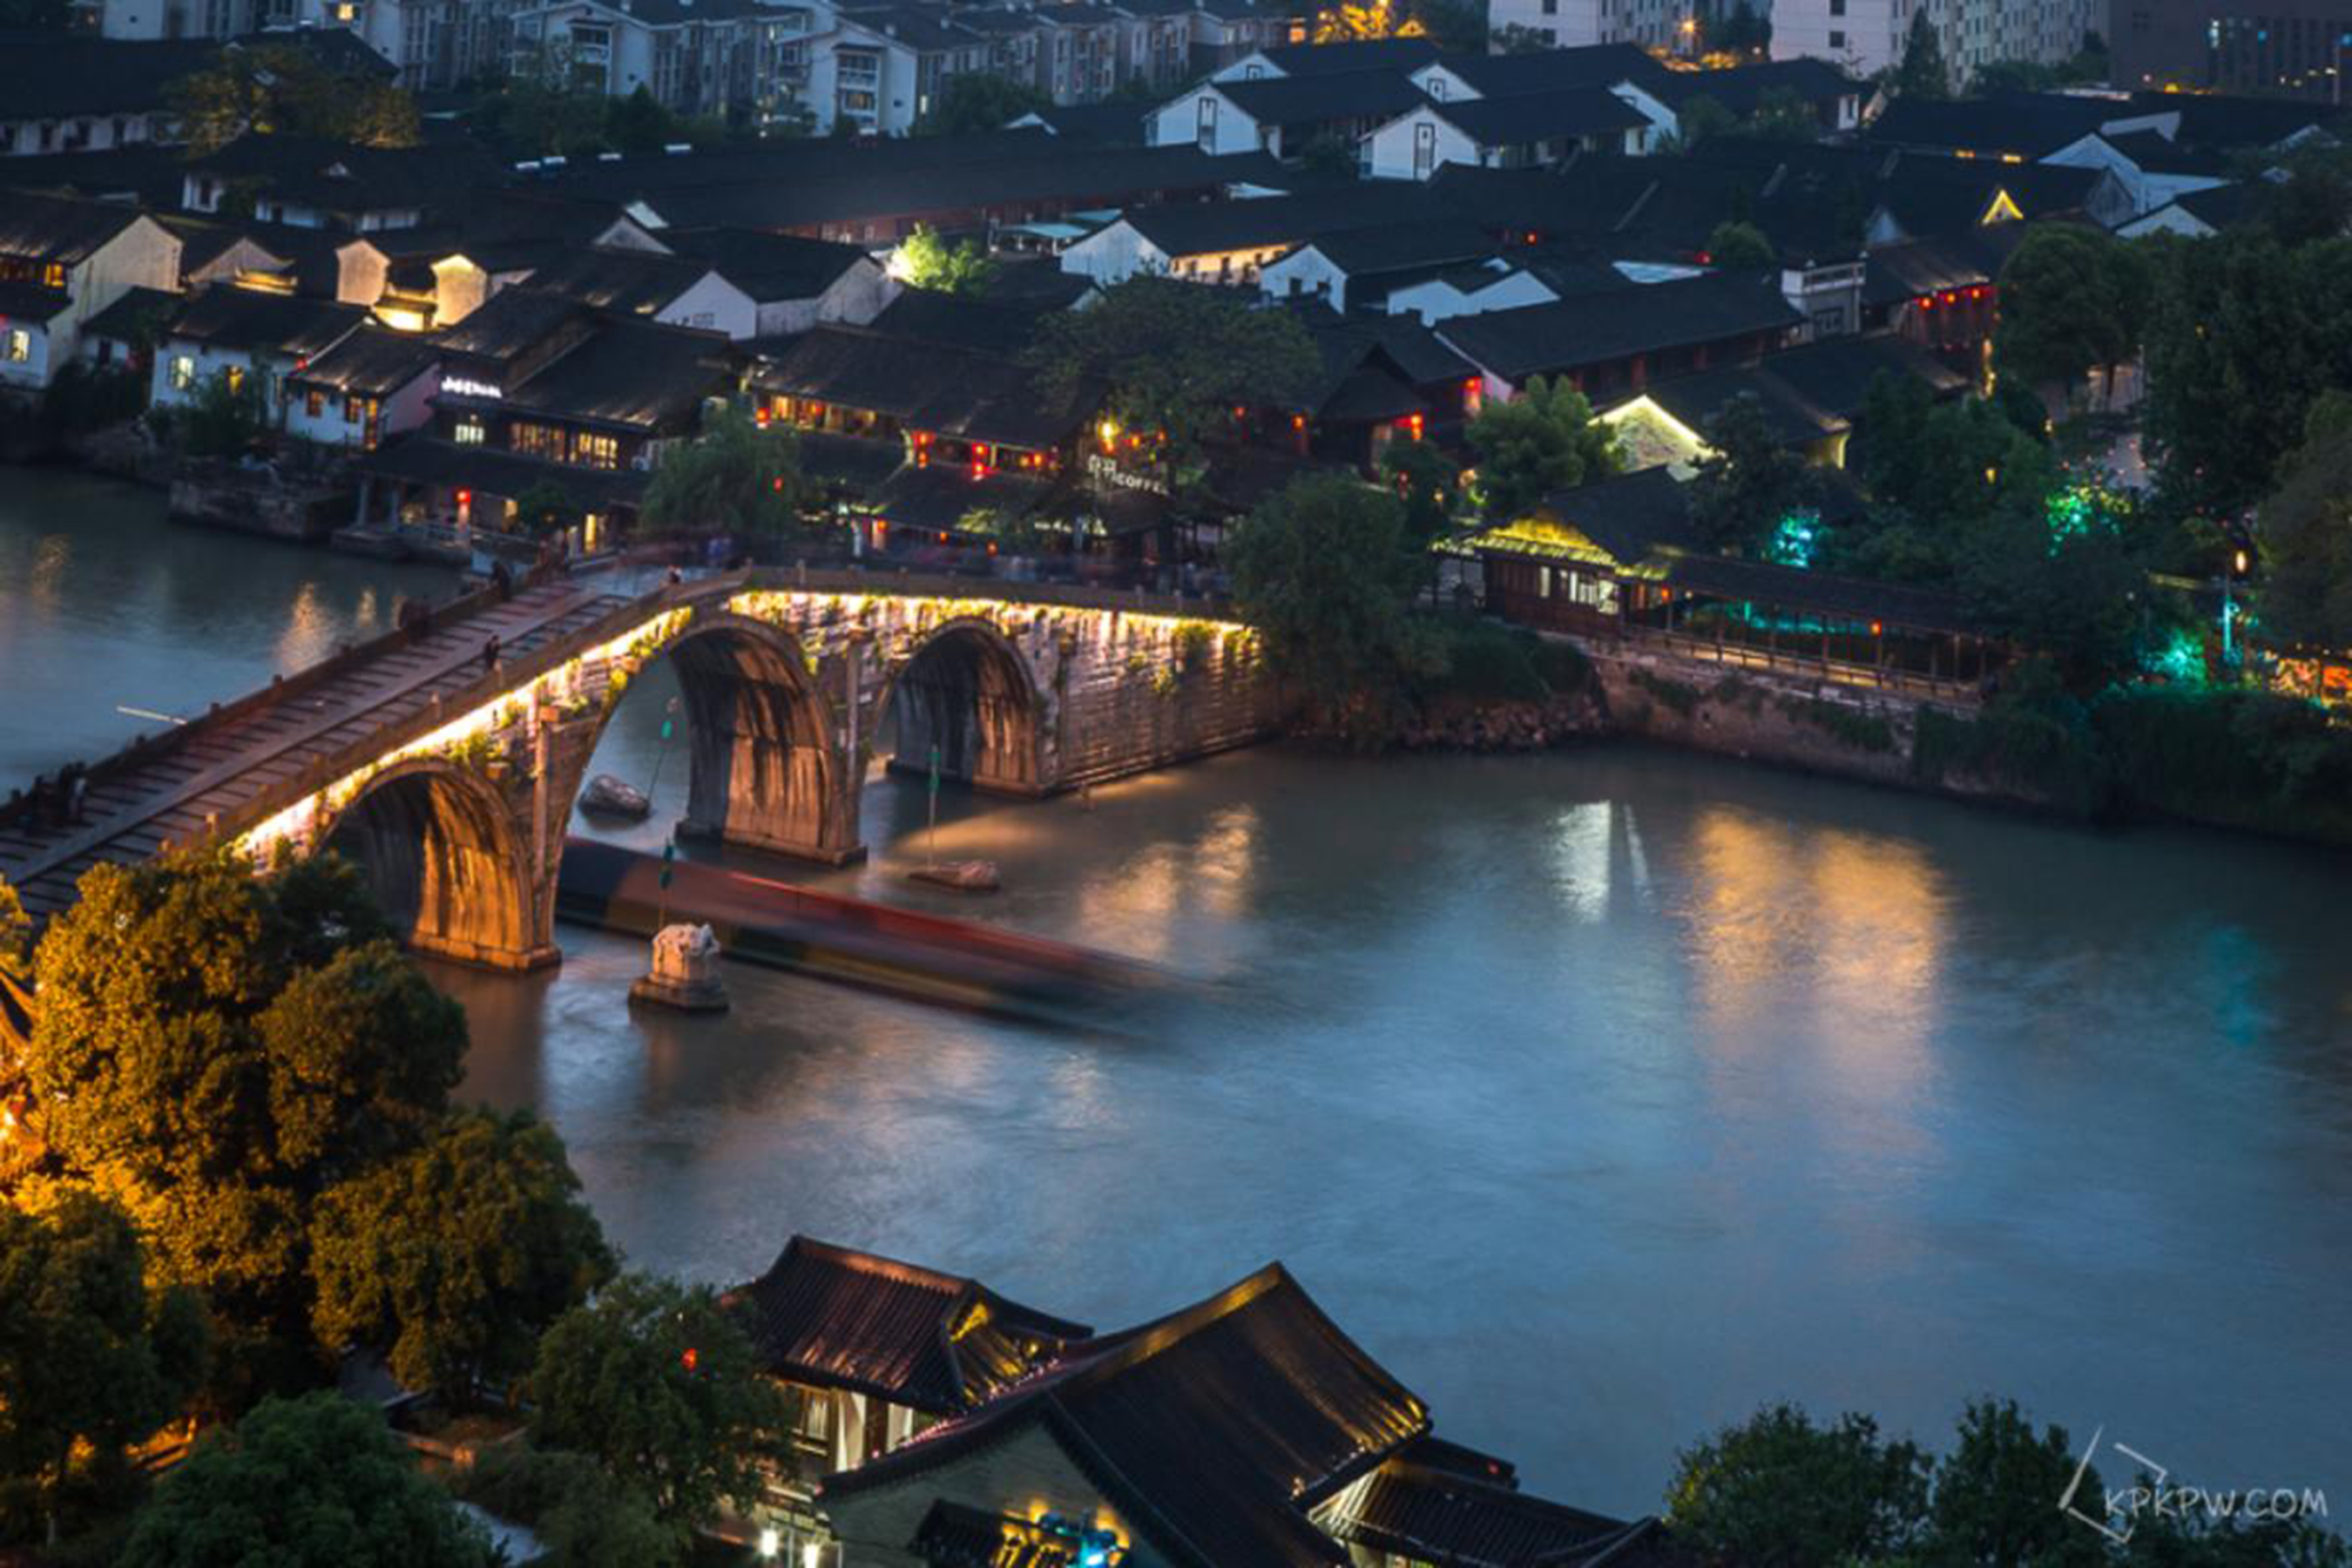 UNESCO heritage in Hangzhou: The Grand Canal